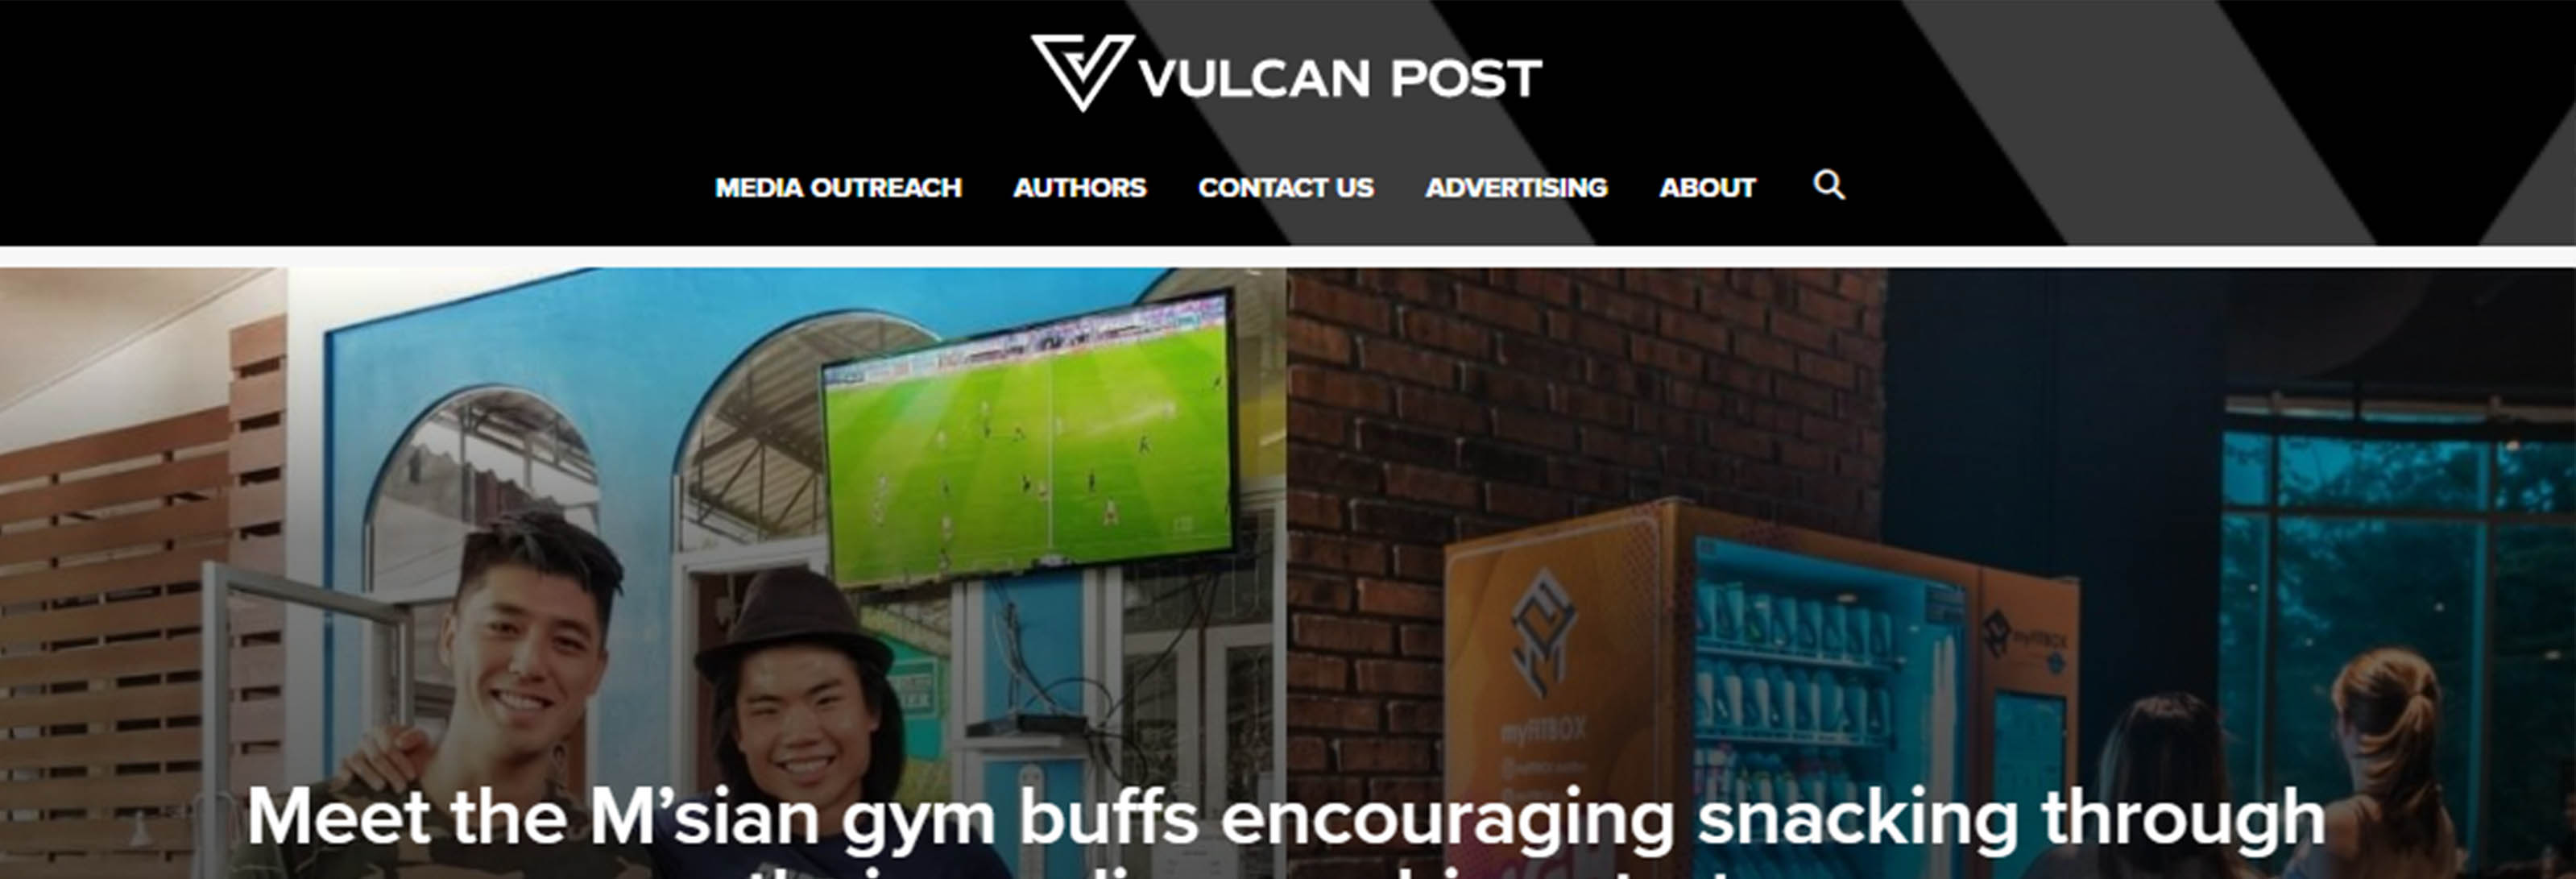 We're In The News! (Vulcan Post)